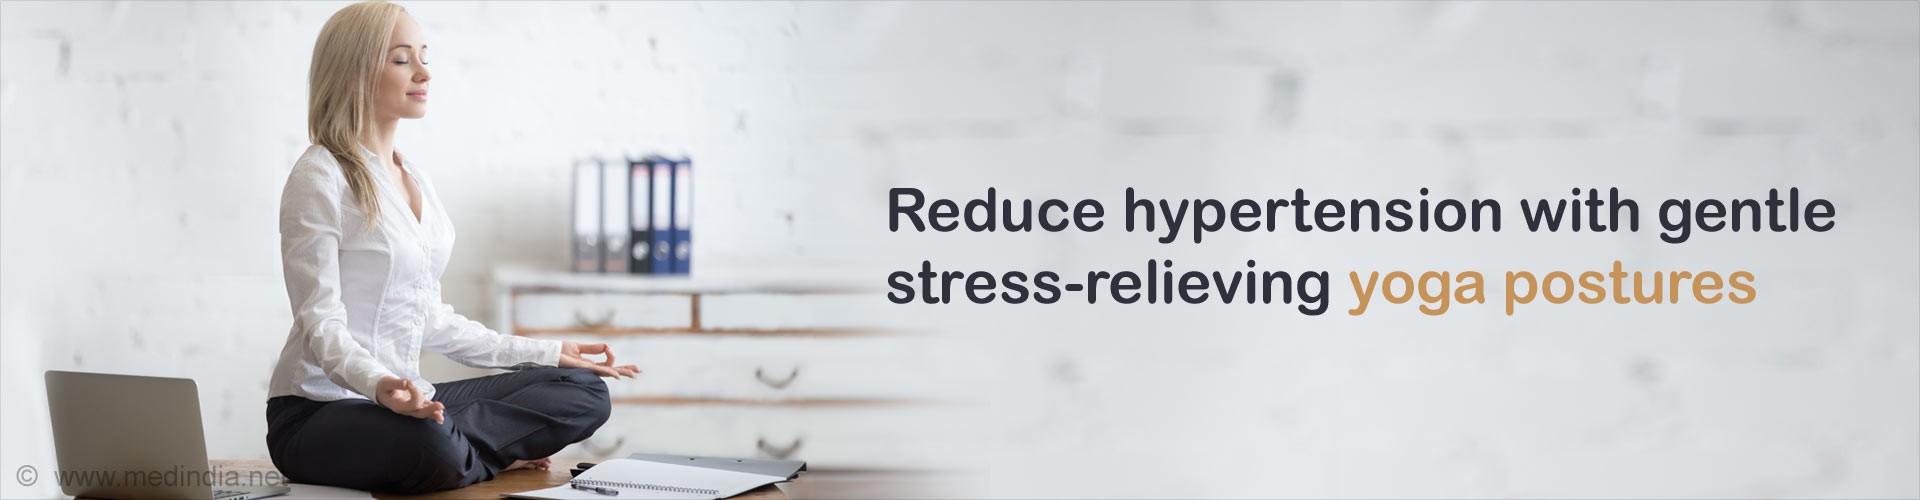 Reduce hypertension with gentle stress-relieving yoga postures